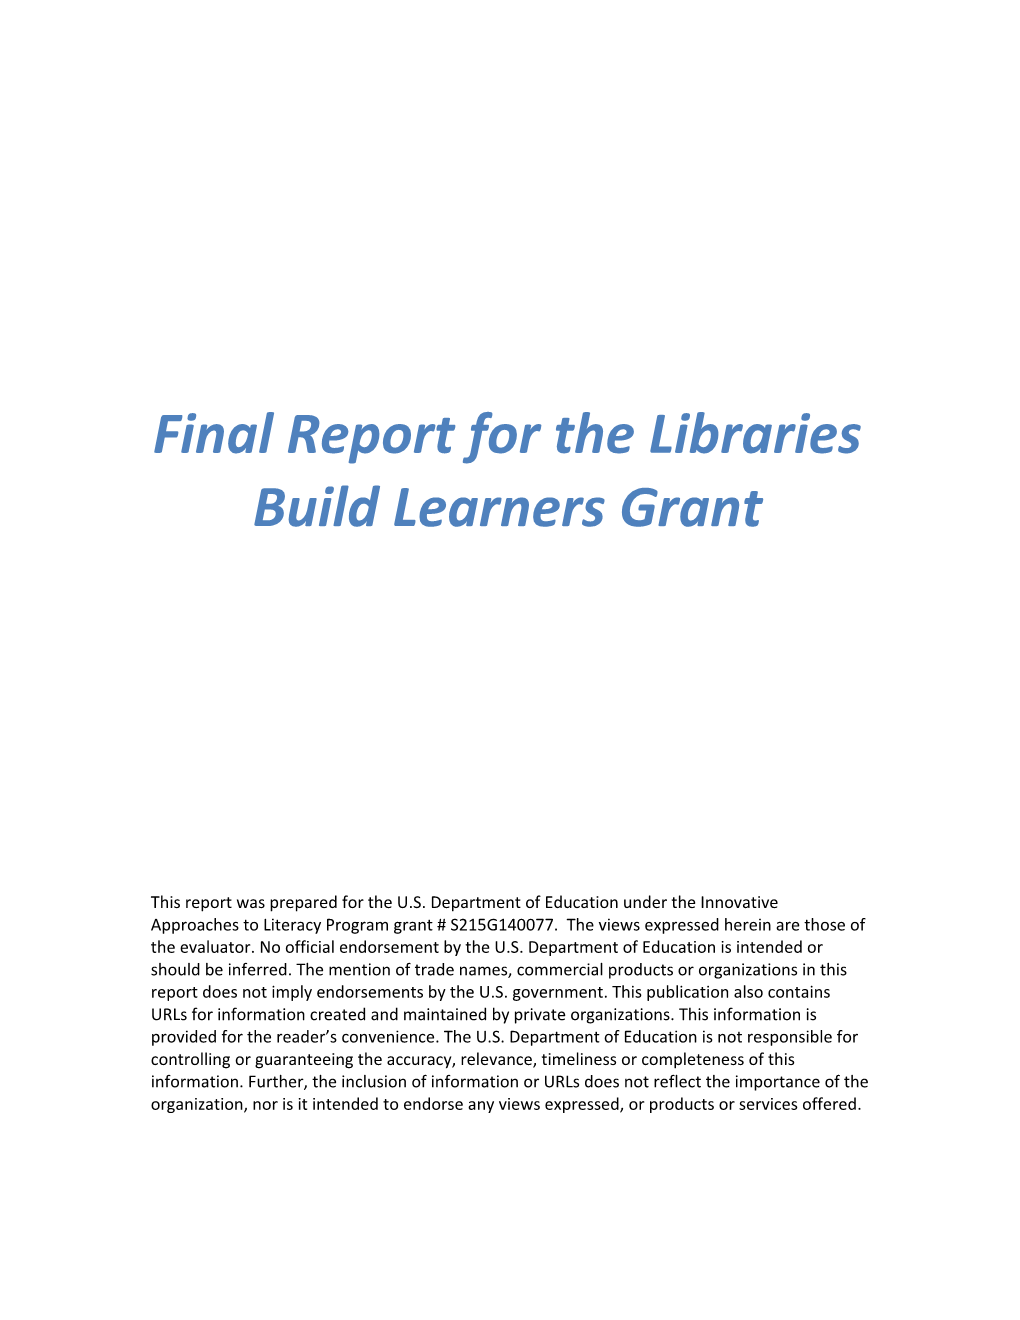 Final Report for the Libraries Build Learners Grant (MS Word)